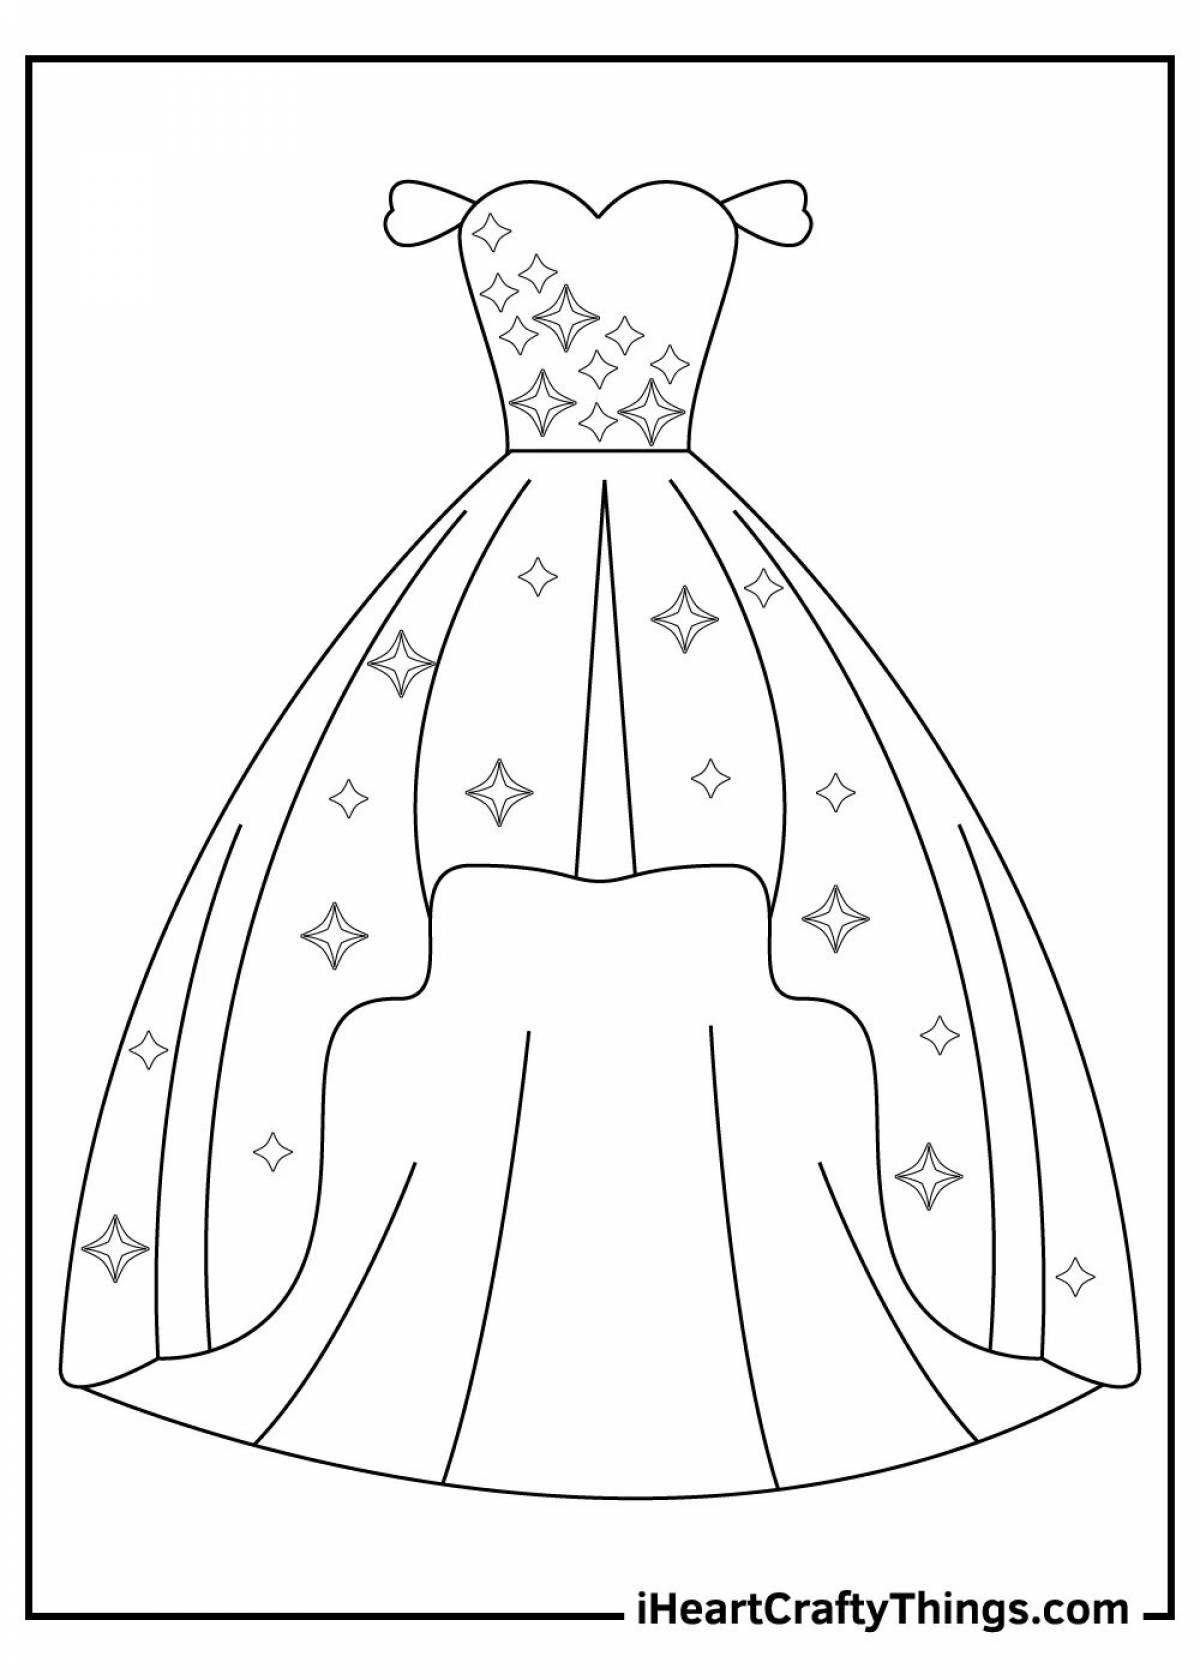 Coloring page with spectacular dress for children 5-6 years old